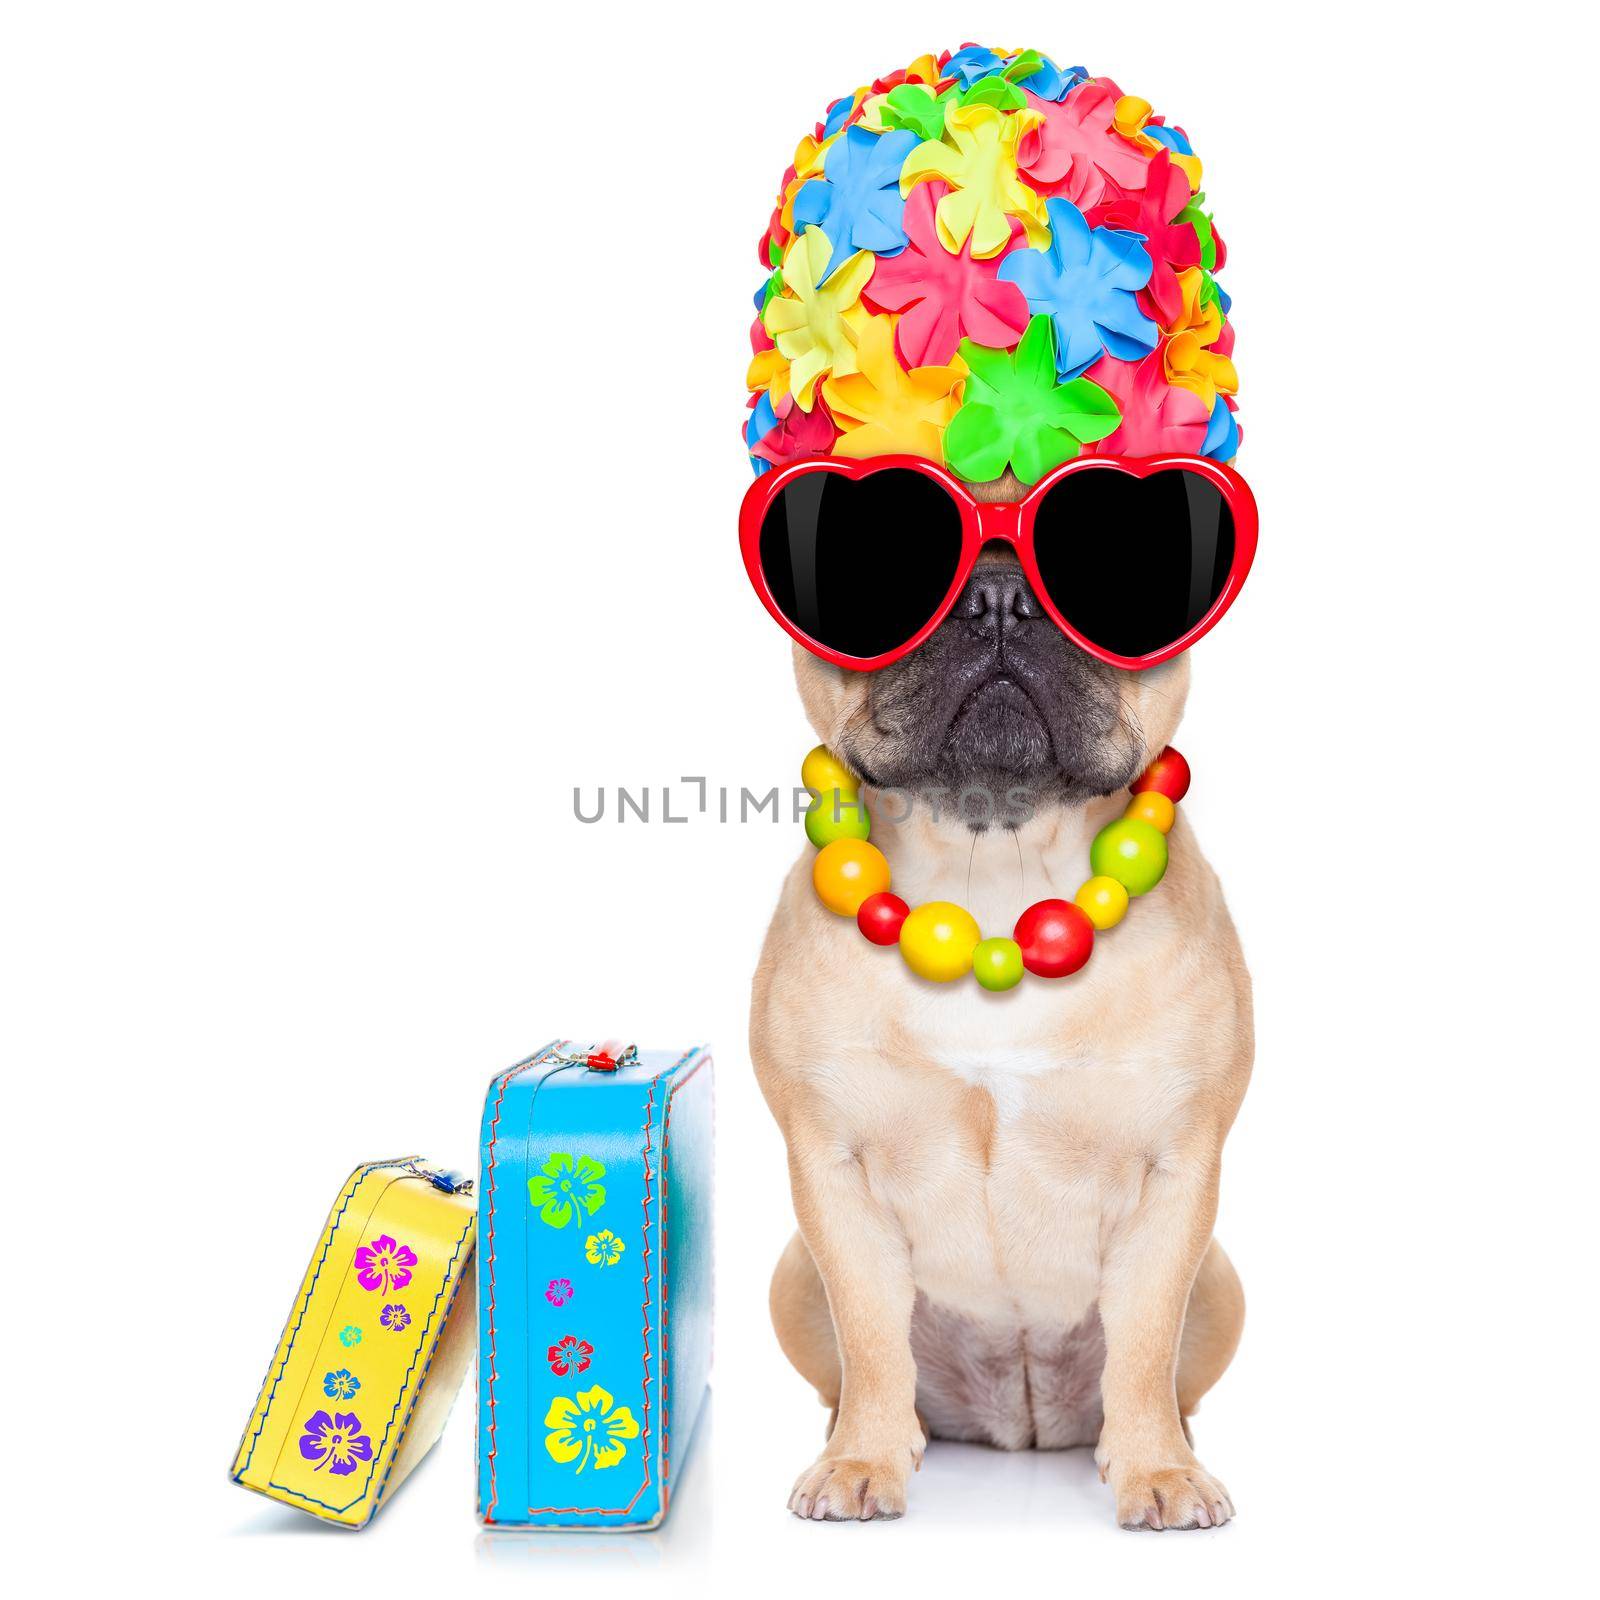 fawn french bulldog dog ready for summer vacation or holidays, besides luggage, isolated on white background